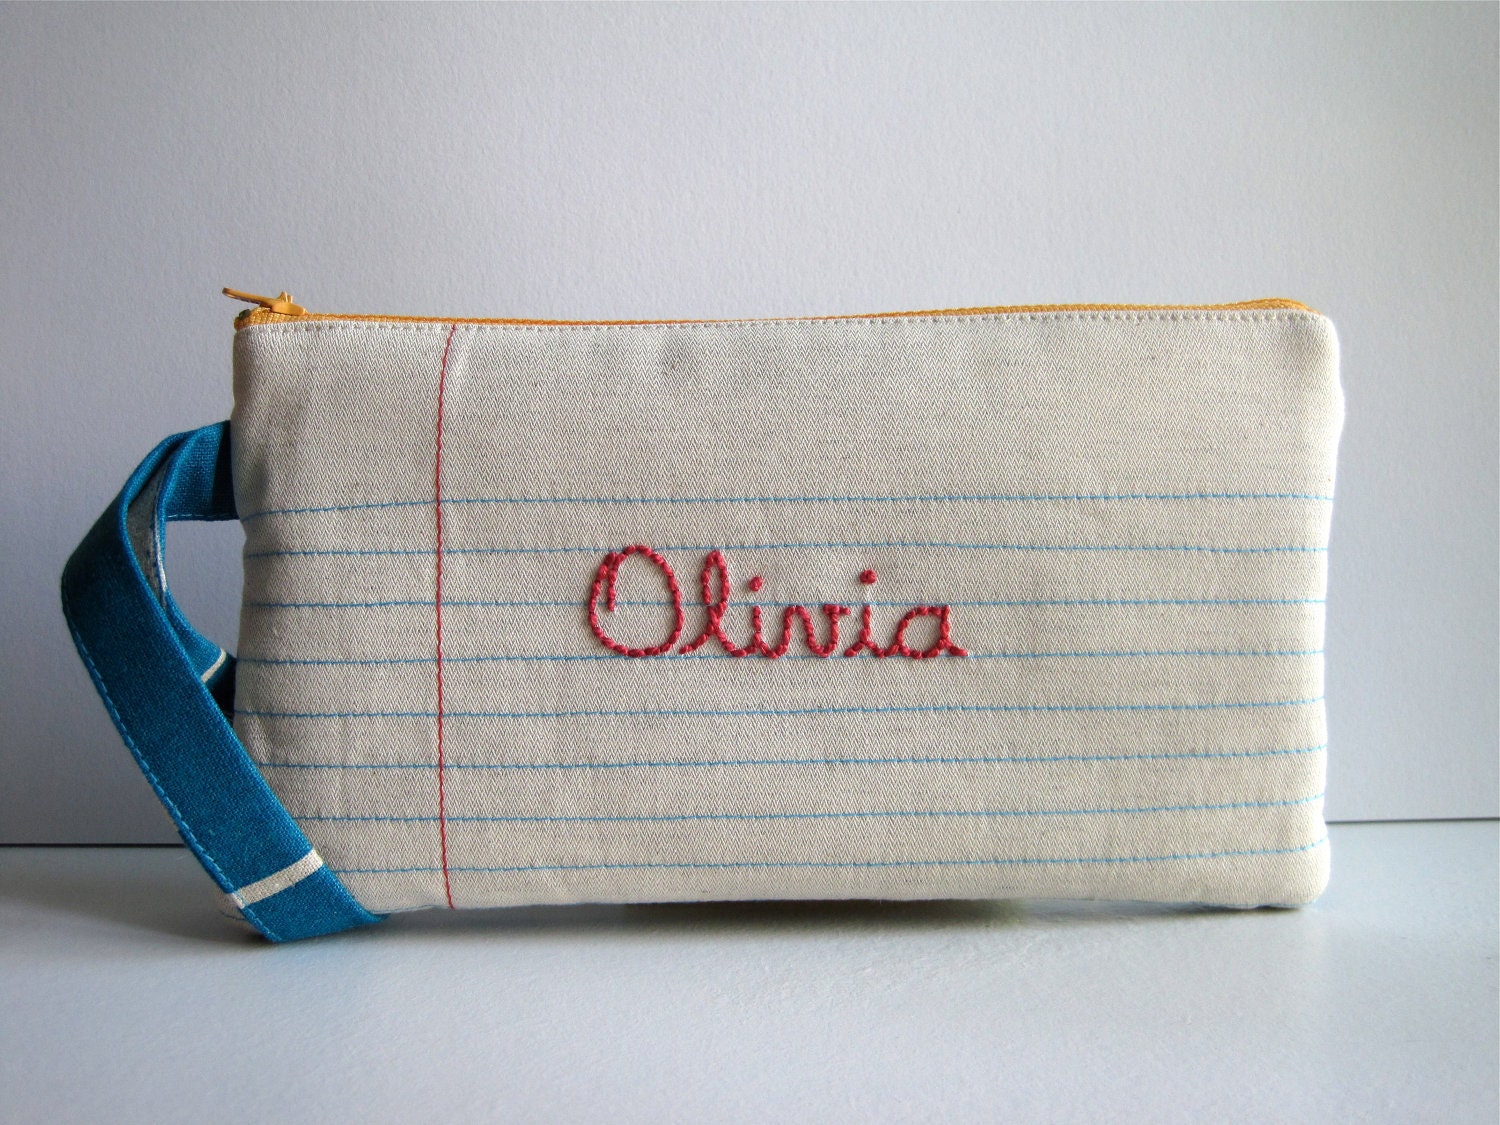 Lined Paper, Writing Paper Fabric and Hand-Embroidered Name. Pencil Case, Pencil Pouch, Wristlet.